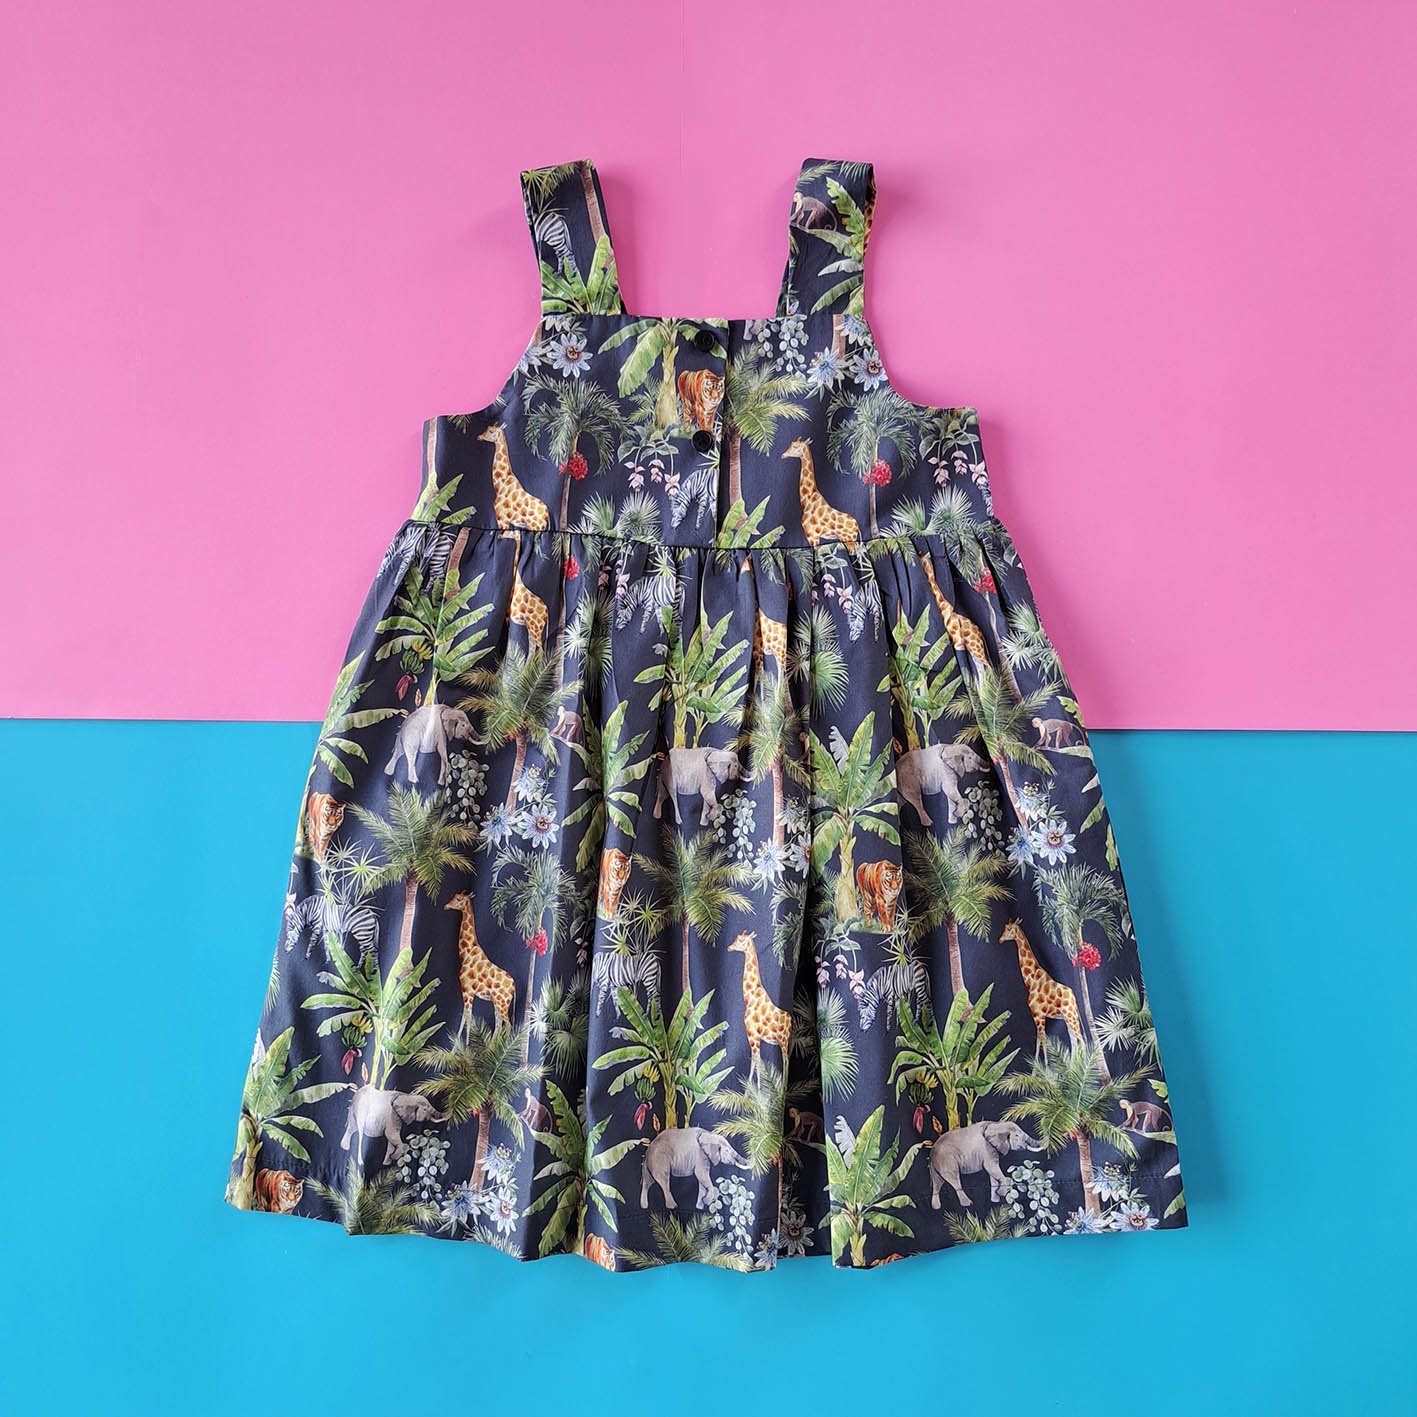 BUTTONS FRONT DARK GREY SAFARI DRESS 100% PRINTED COTTON*PRE-ORDER SHIP OUT 3 MARCH